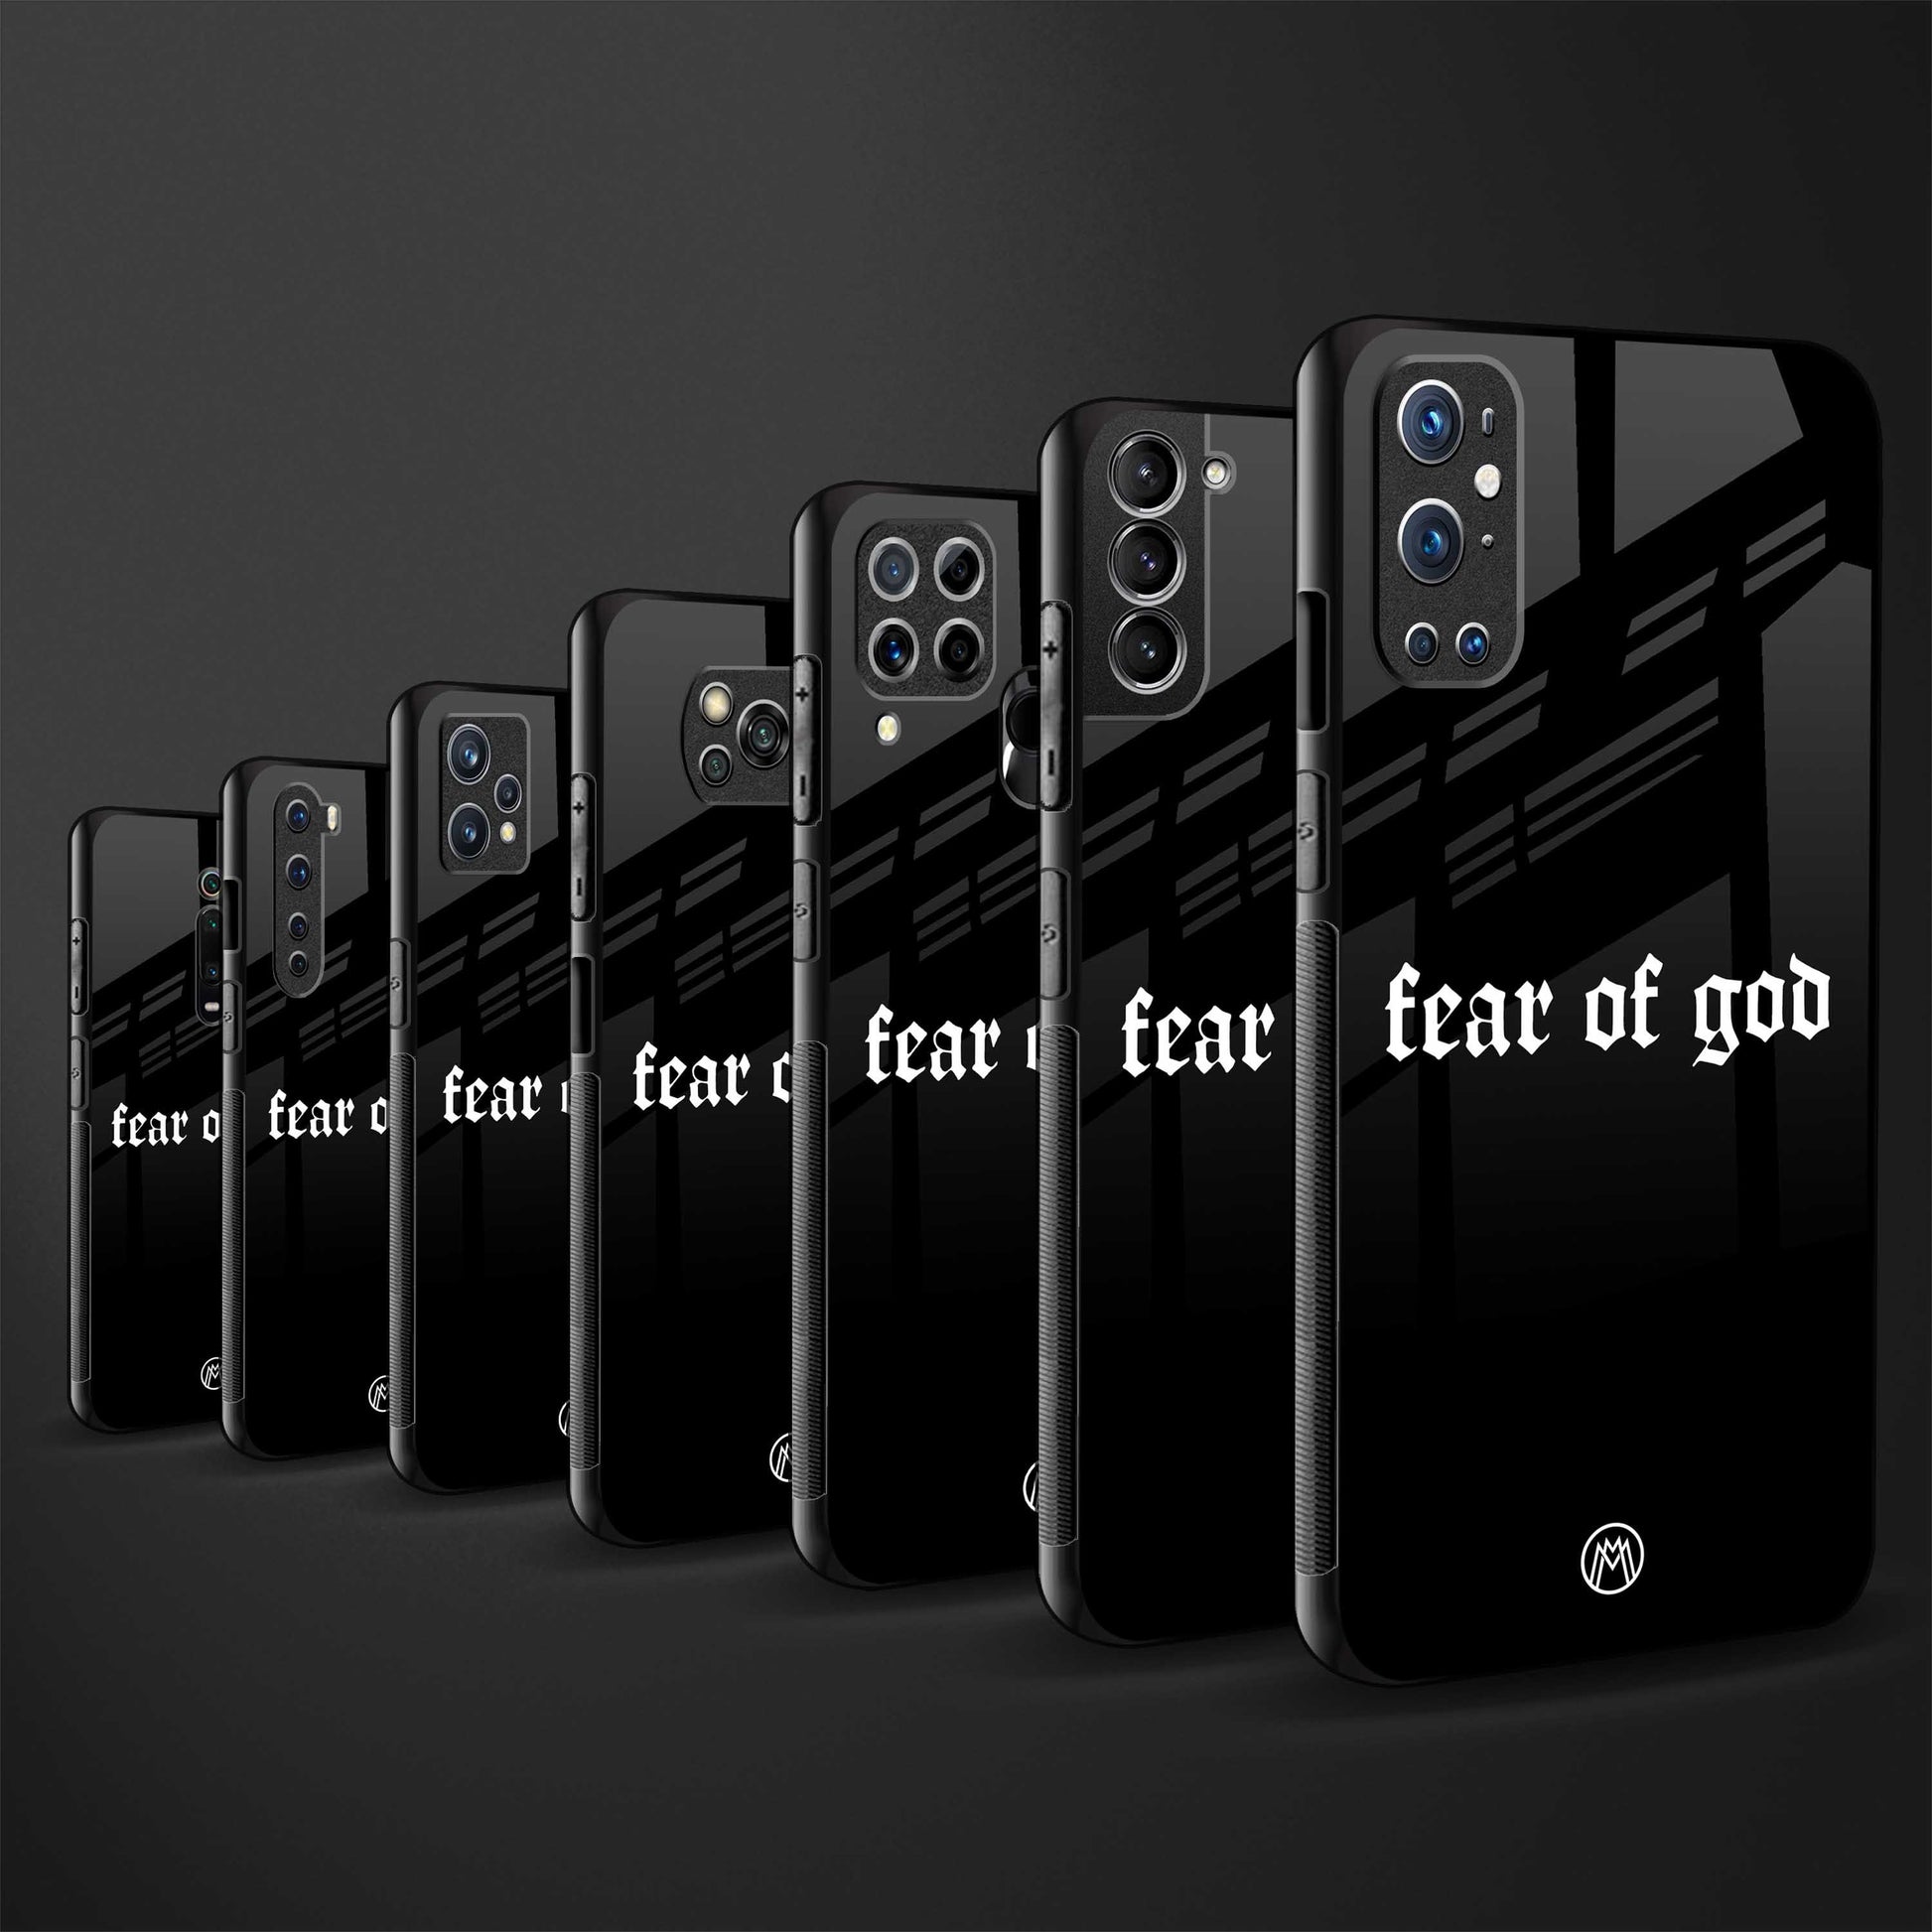 fear of god phone cover for redmi 6a